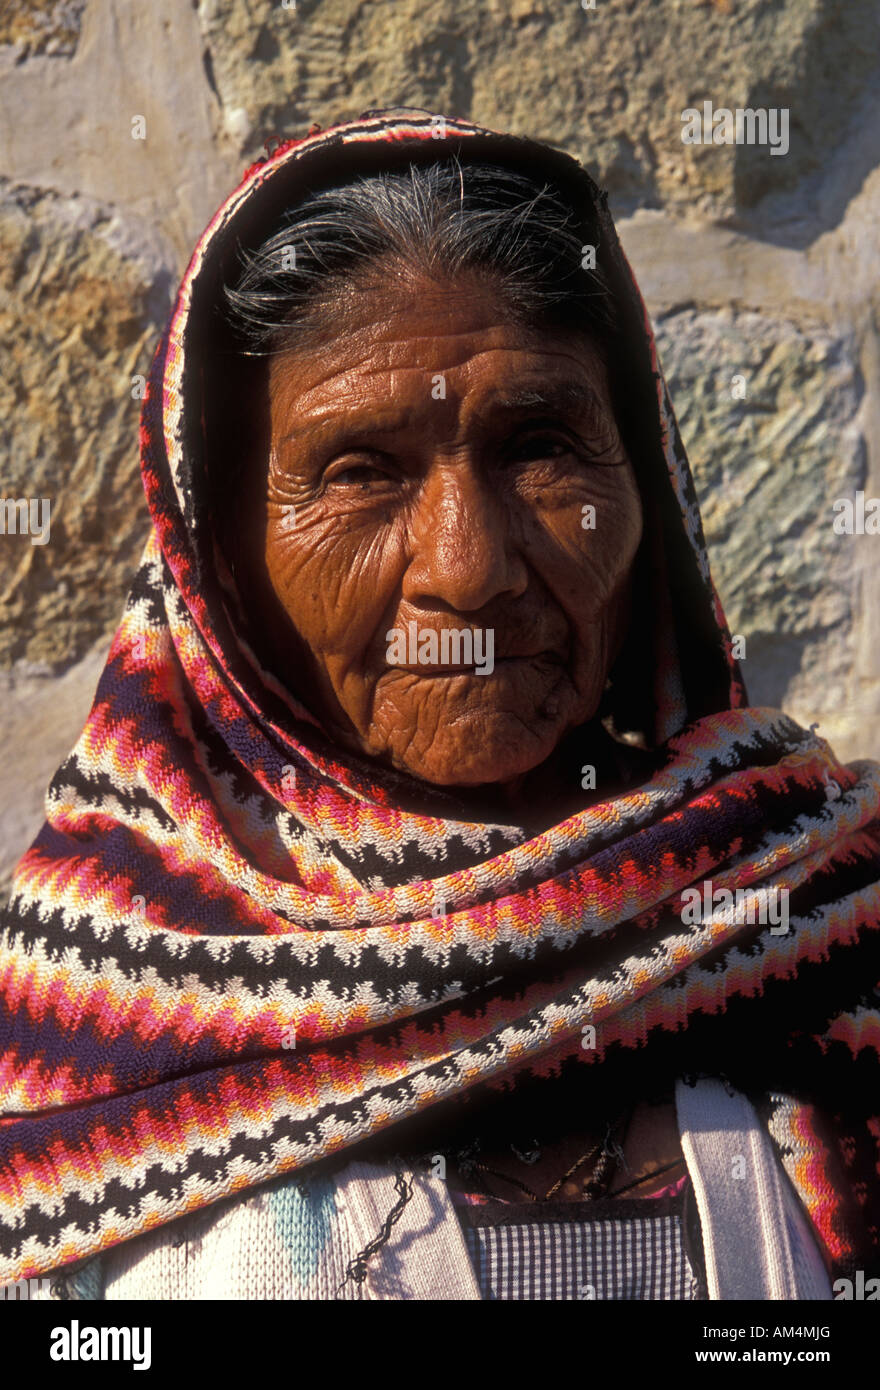 1 One Mexican Old Woman Mature Woman Elderly Woman Head And